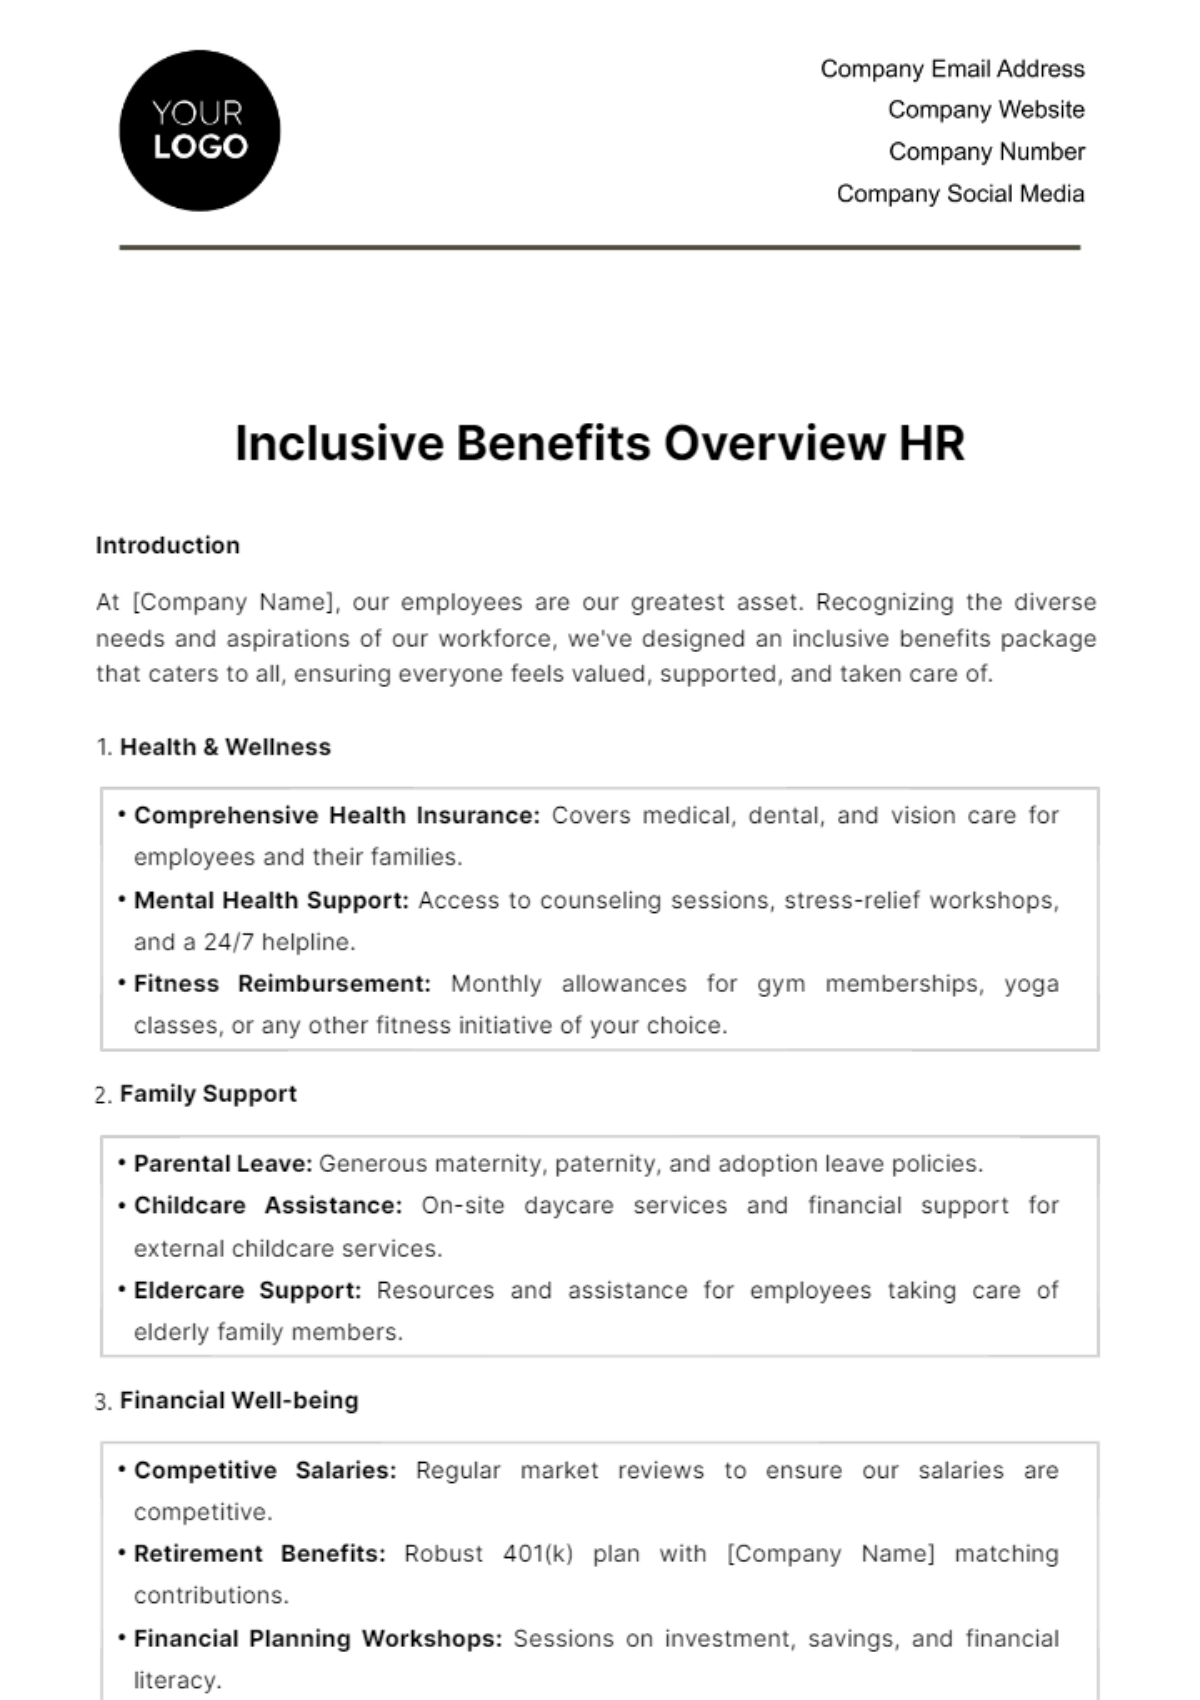 Free Inclusive Benefits Overview HR Template